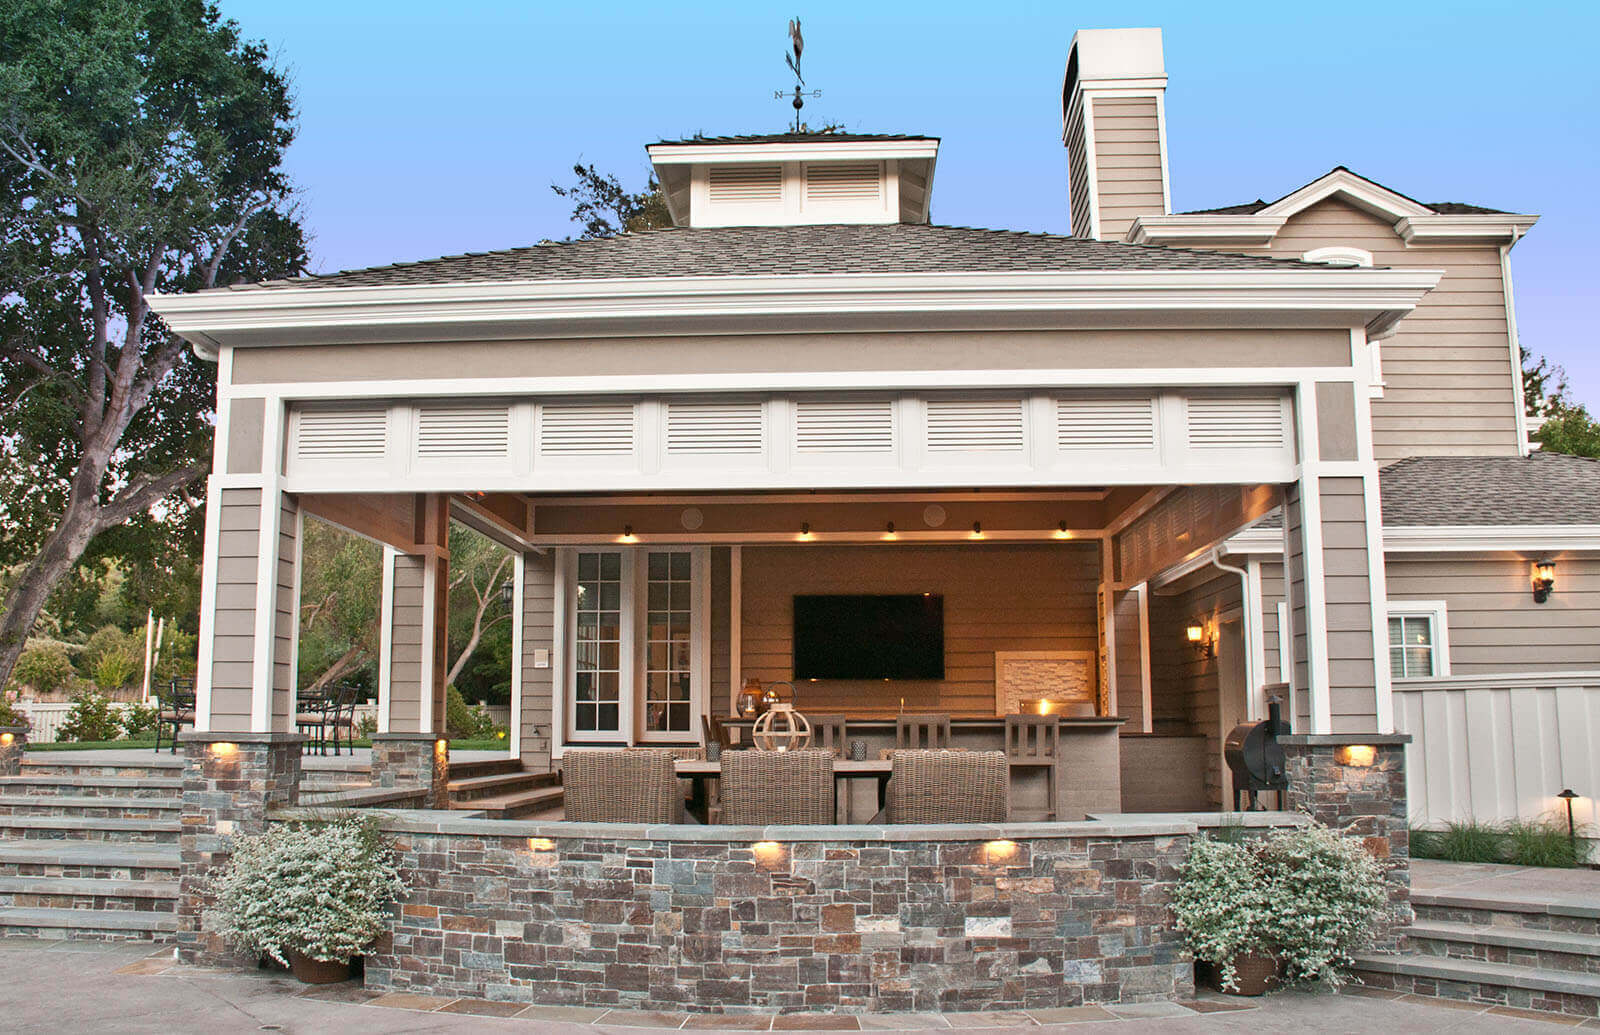 Contemporary farmhouse-style pergola shelters outdoor dining area with stone details and landscape lighting